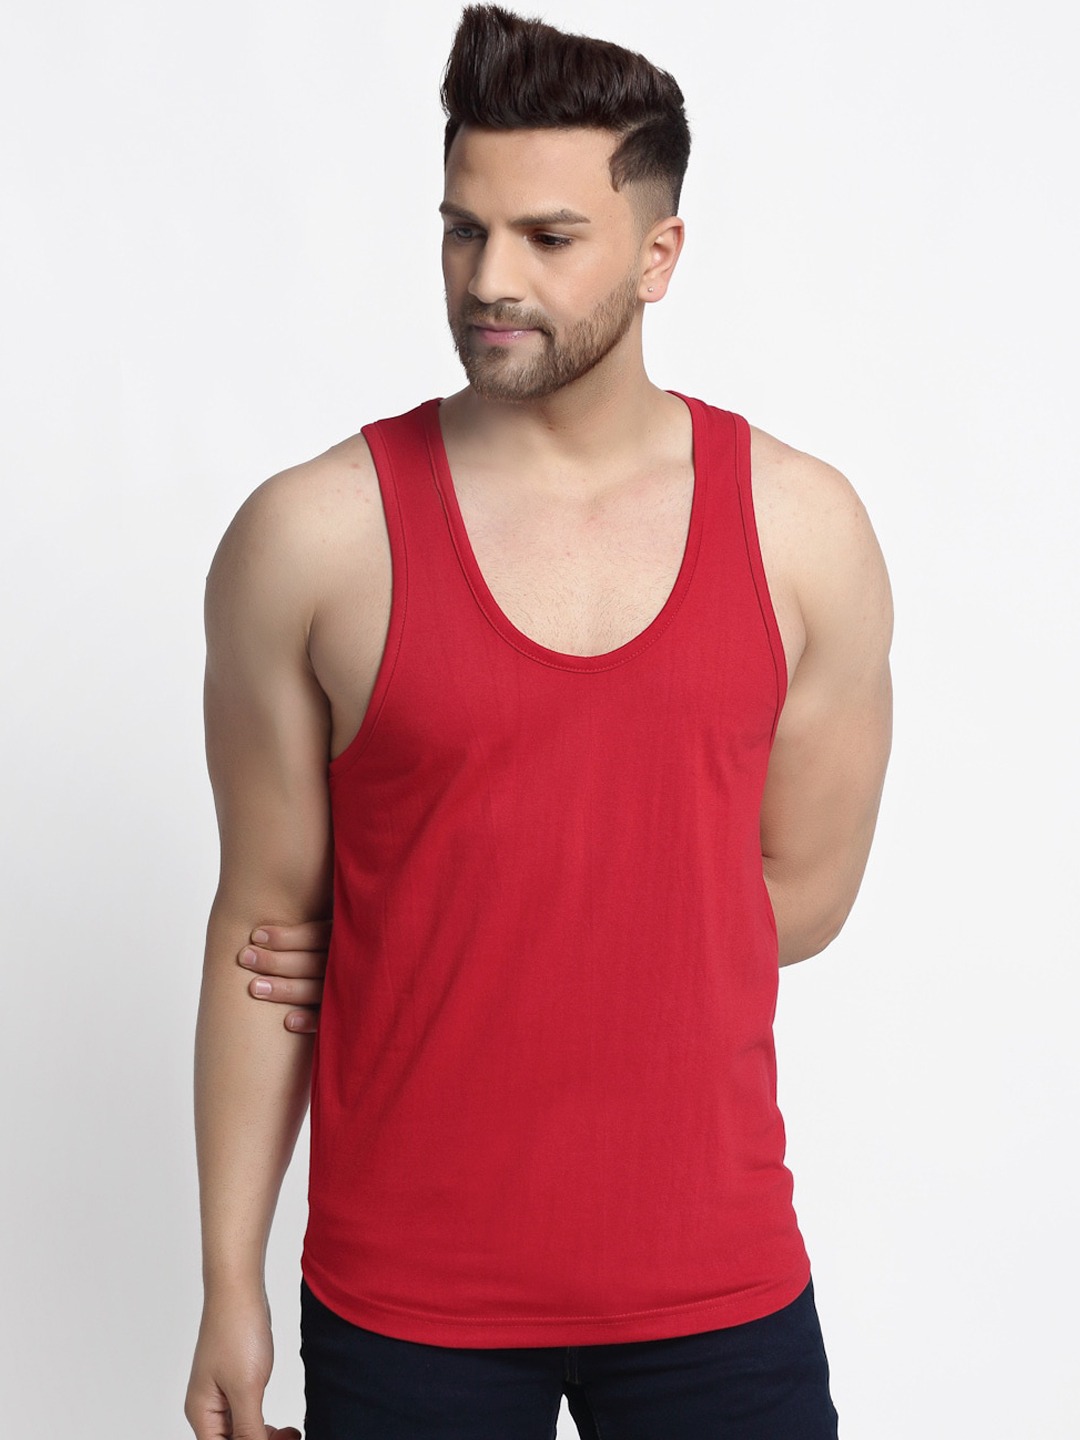 Clothing Innerwear Vests | Friskers Men Pack Of 2 Solid Pure Cotton Casual Gym Vests - VI07286